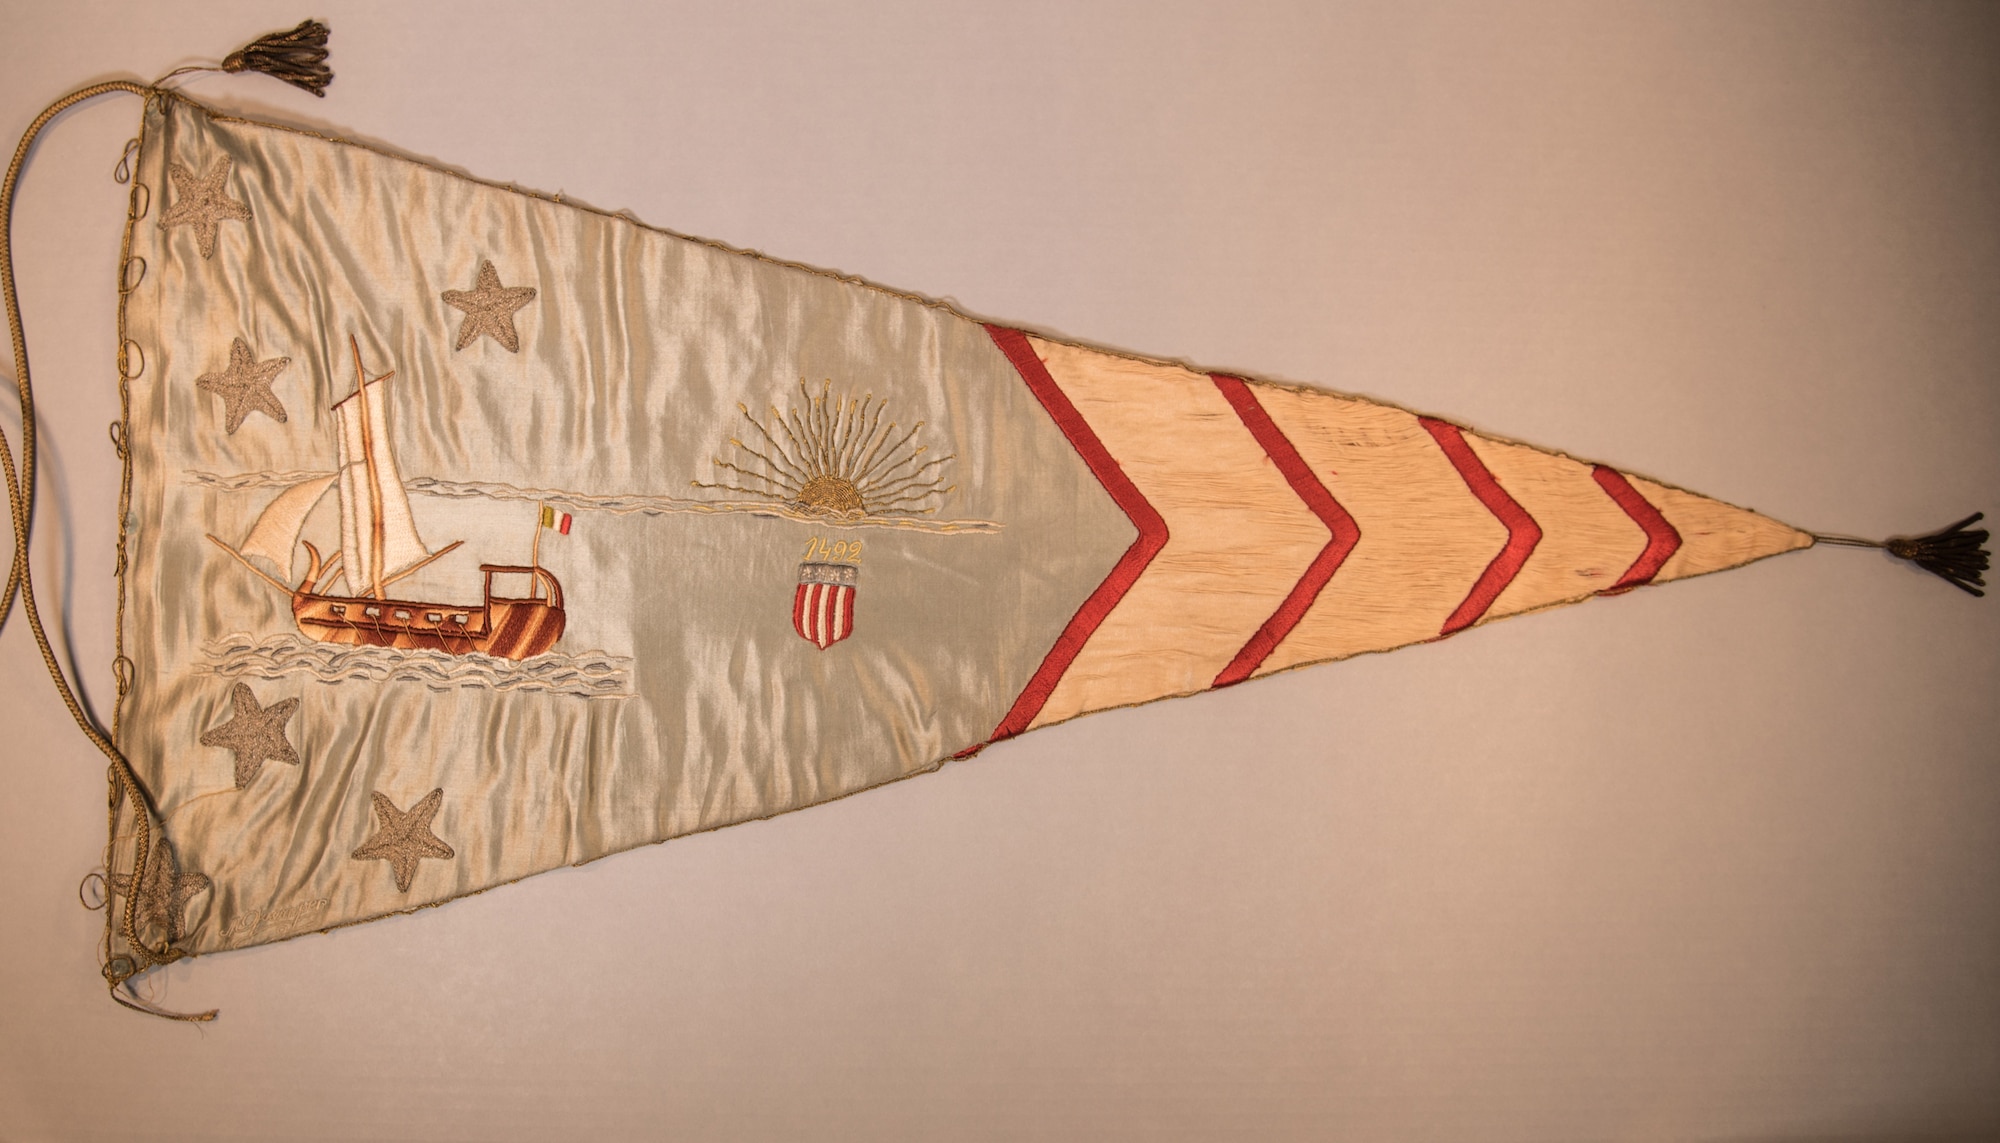 On April 12, 1919, a flag presentation ceremony was held in Paris in honor of the Air Service, A.E.F. Hundreds of banners, hand made by French women, were presented to representatives of the various U.S. squadrons that had served in France during WWI. Five of theses pennants are on display in the museum's Early Years Gallery. This item is currently in storage. (U.S. Air Force photo by Ken LaRock)